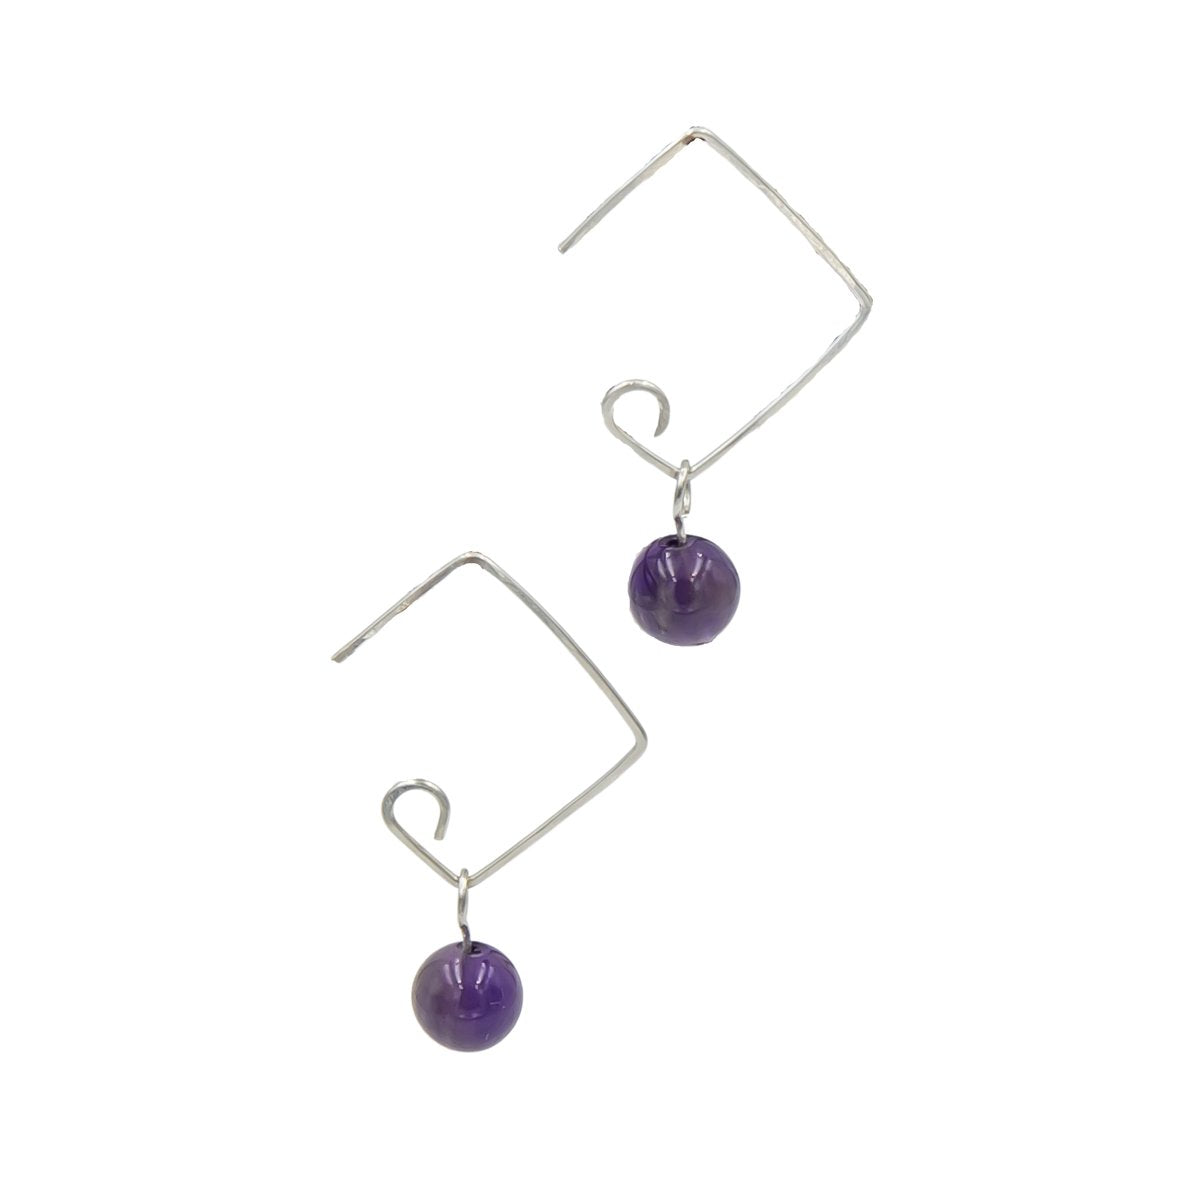 Earth Song Jewelry Modern Hammered Sterling Silver Amethyst Square Earrings